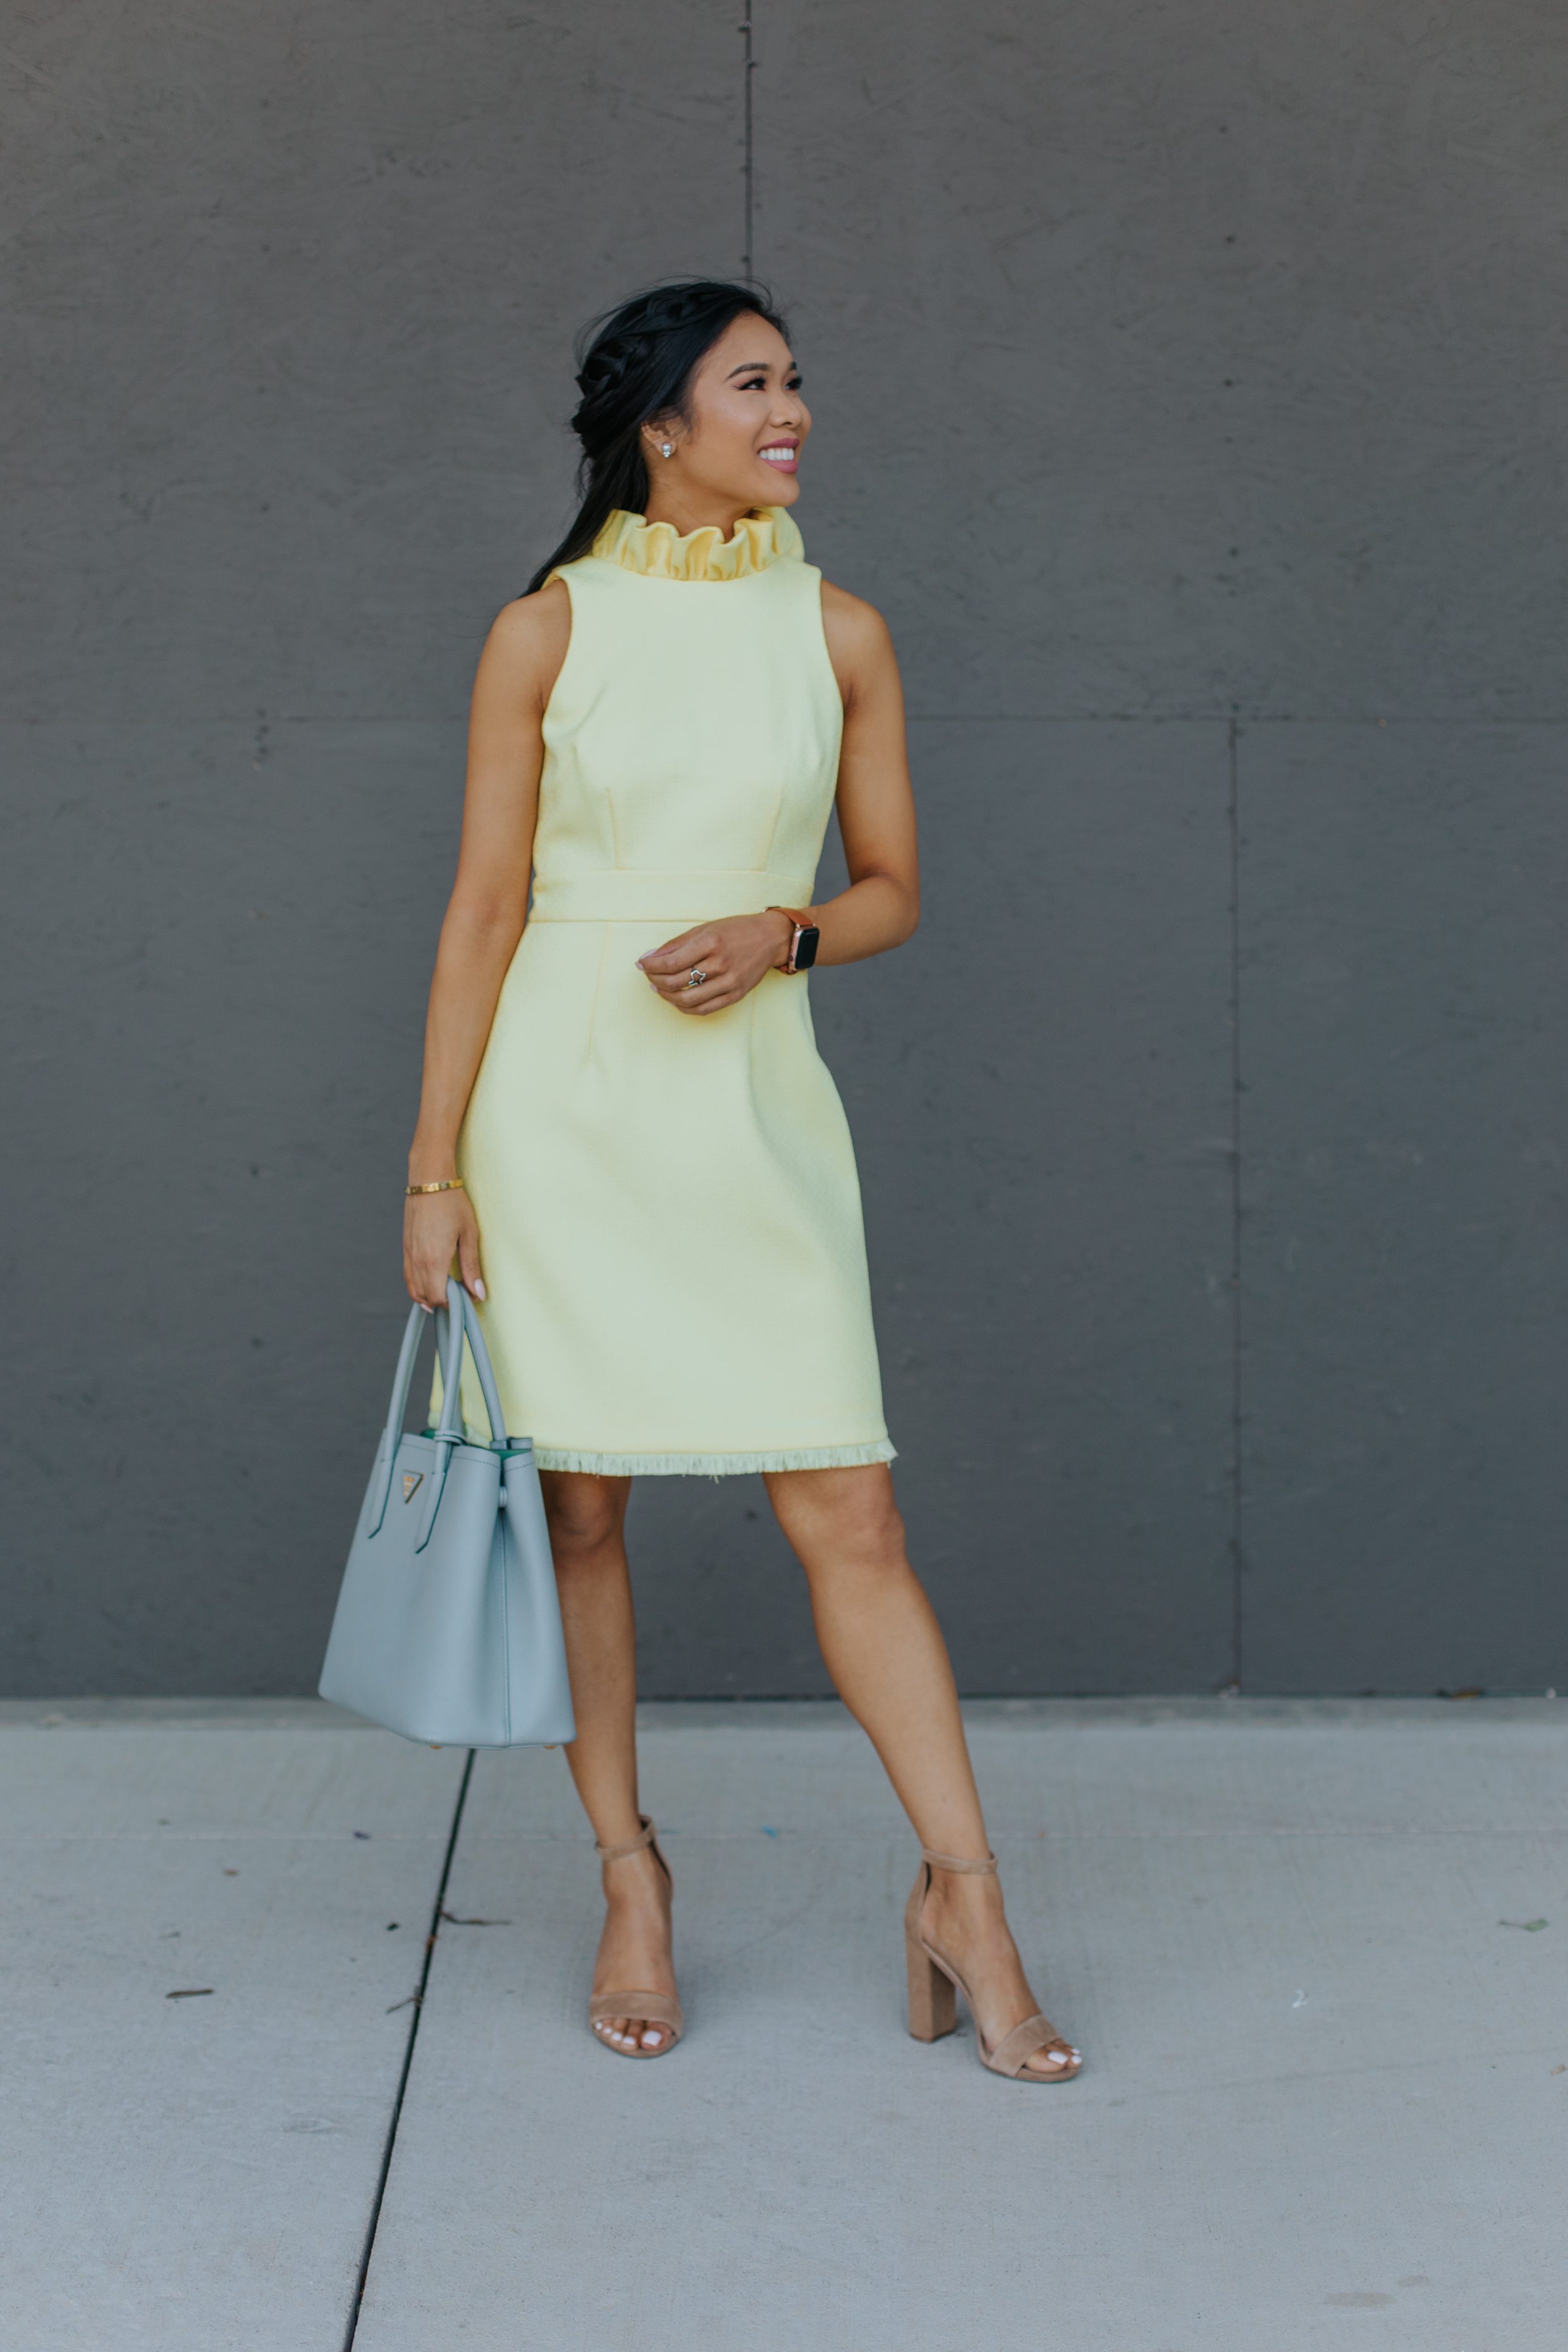 Blogger Hoang-Kim wears a yellow dress perfect for graduation or bridal showers